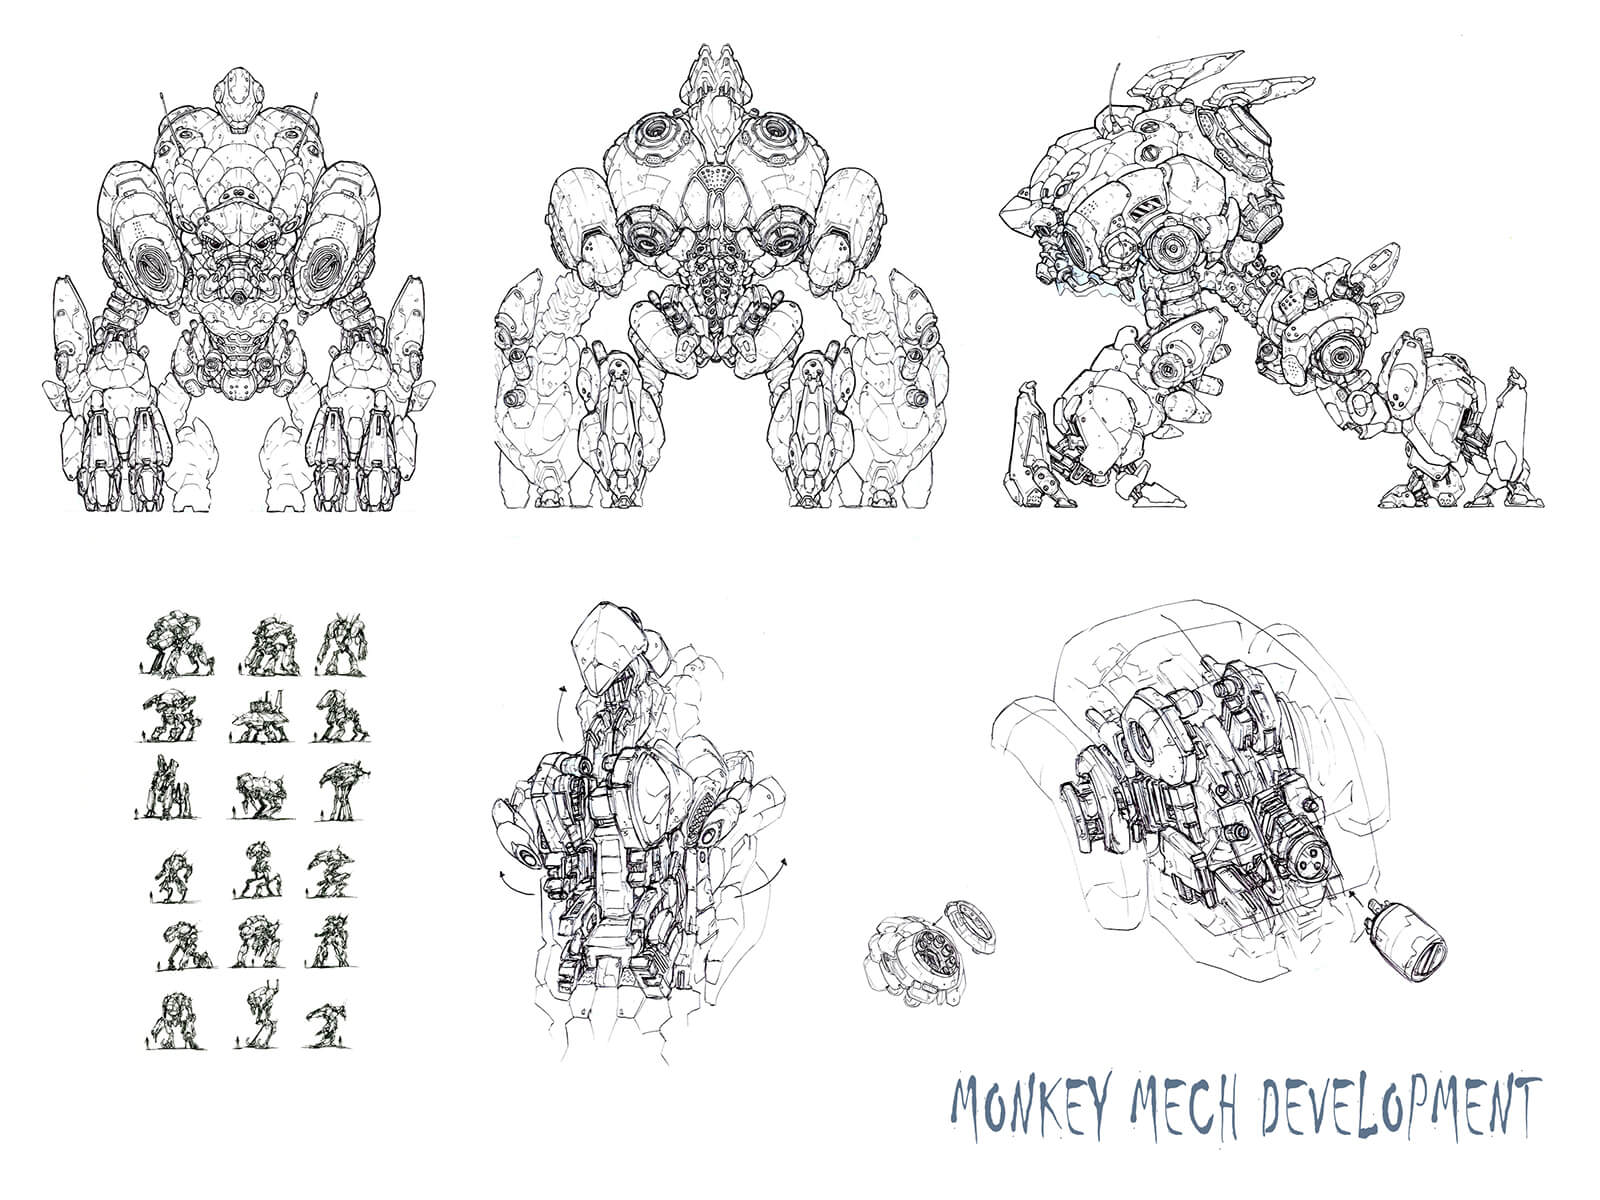 Black-and-white concept sketches and cross-sections of a hulking, quadrupedal mech machine in various resting poses.